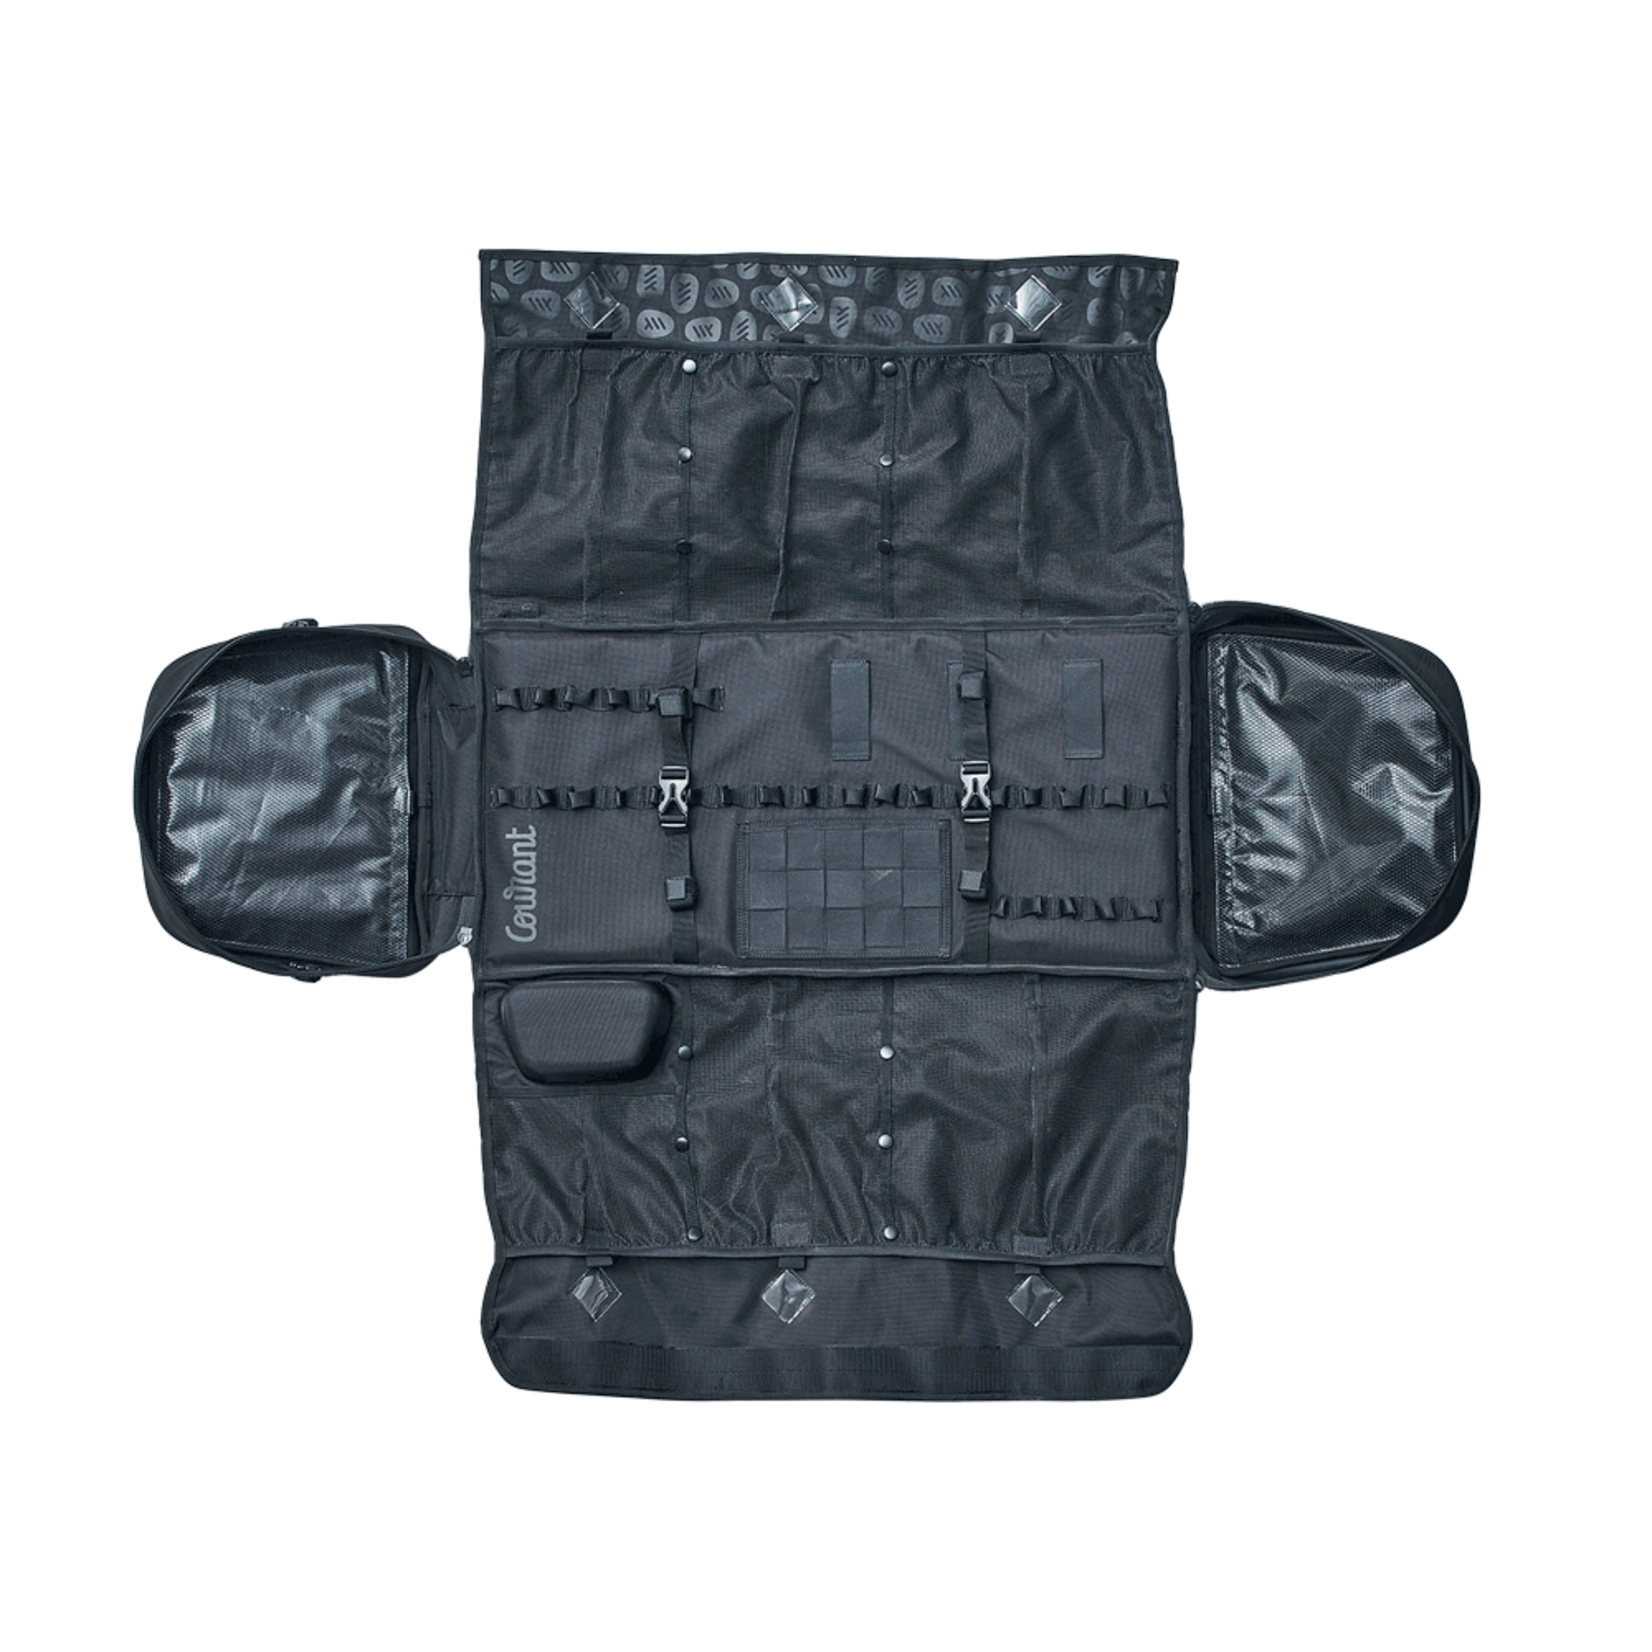 Courant Courant Cross Pro tactical black XL - 75 L  (Cross Belt included)